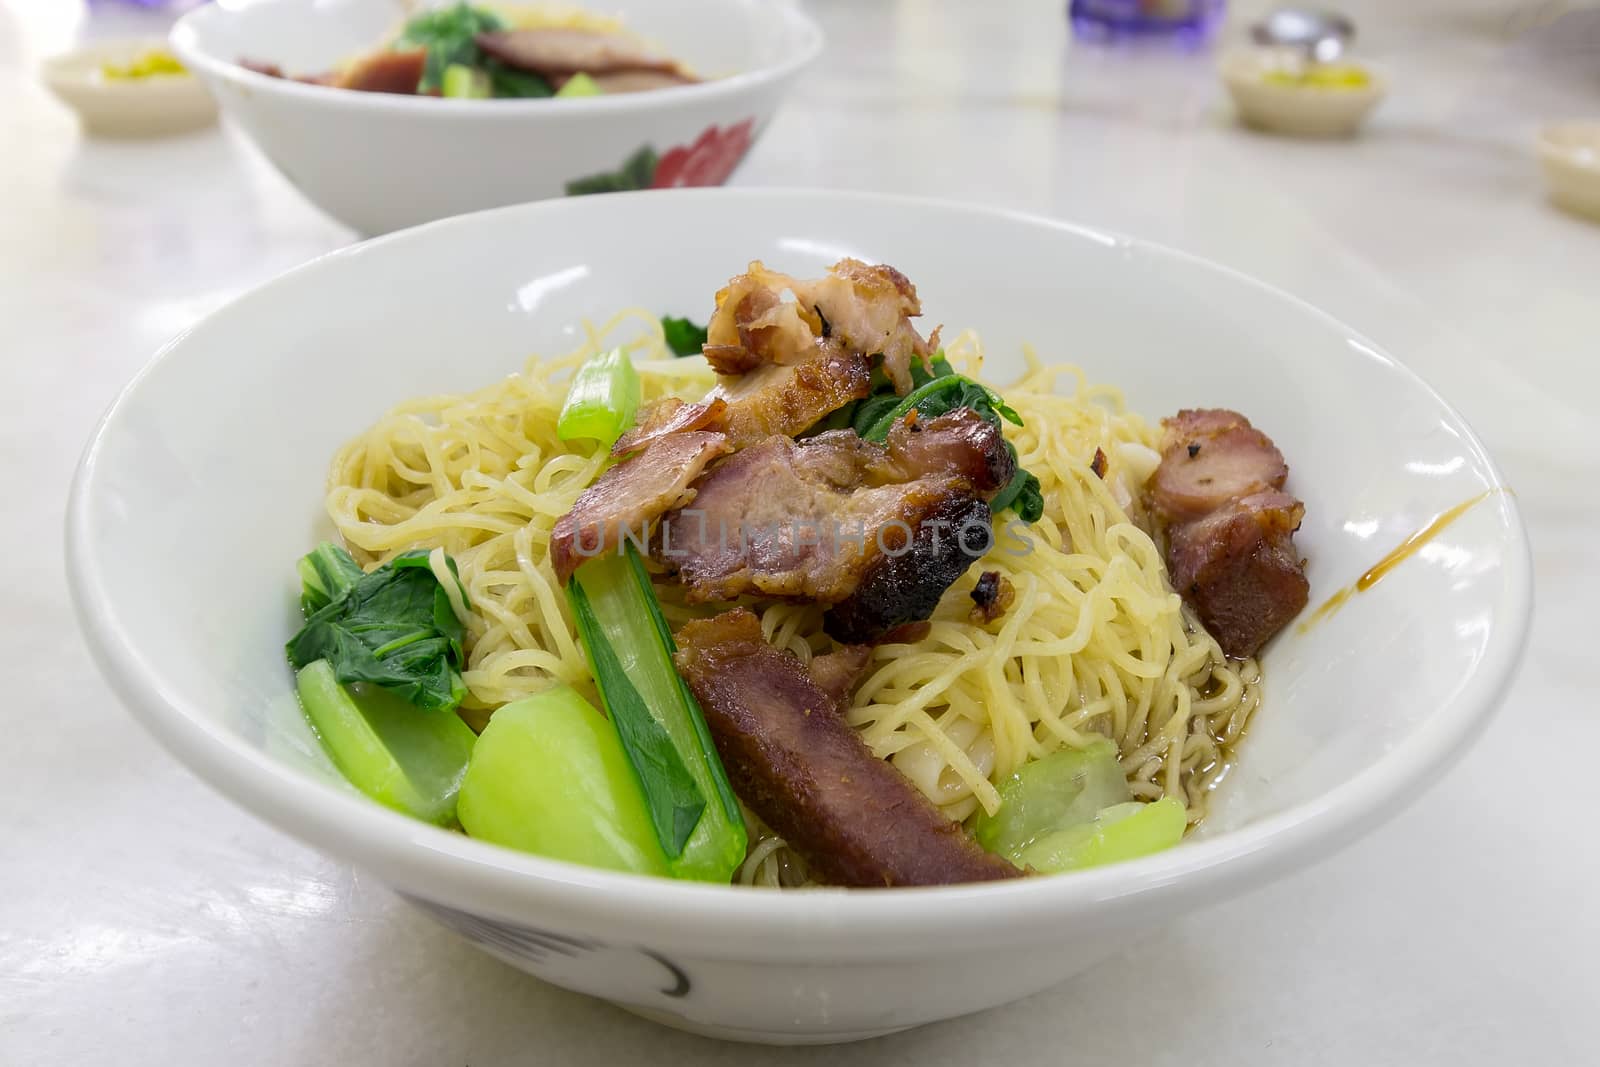 Char Siew Barbecue Pork Wanton Noodles on Table Closeup by jpldesigns